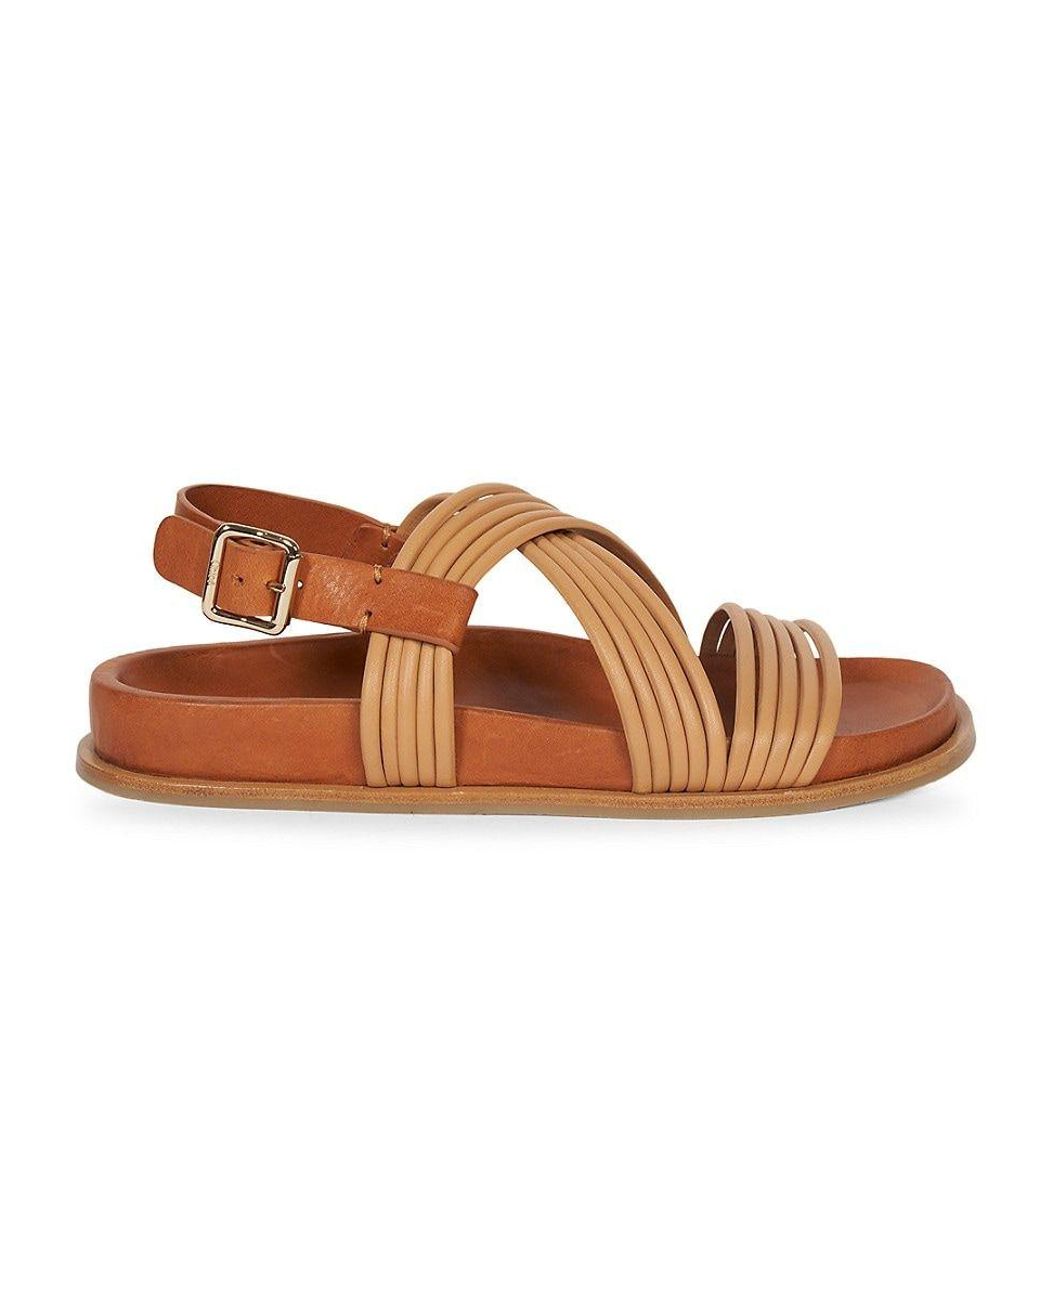 Chloé Kacey Leather Ankle Strap Sandals in Brown | Lyst